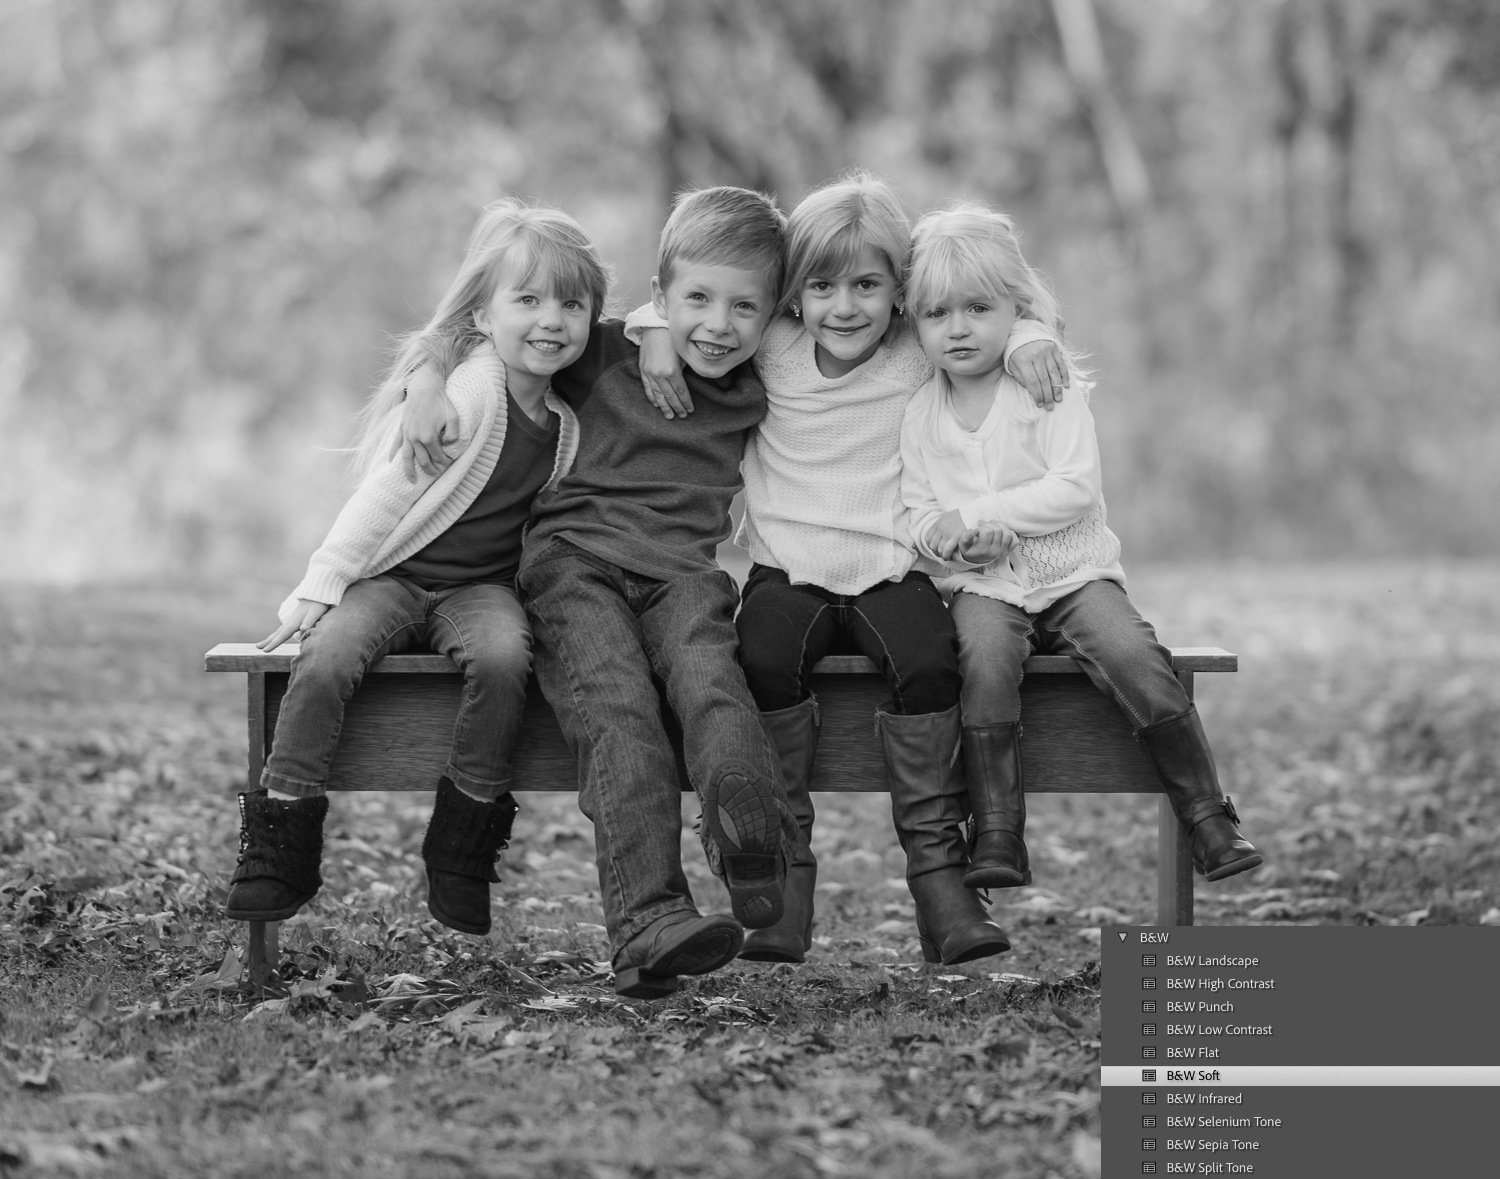 Black and white family photos. Four children sitting on a bench in the forest.